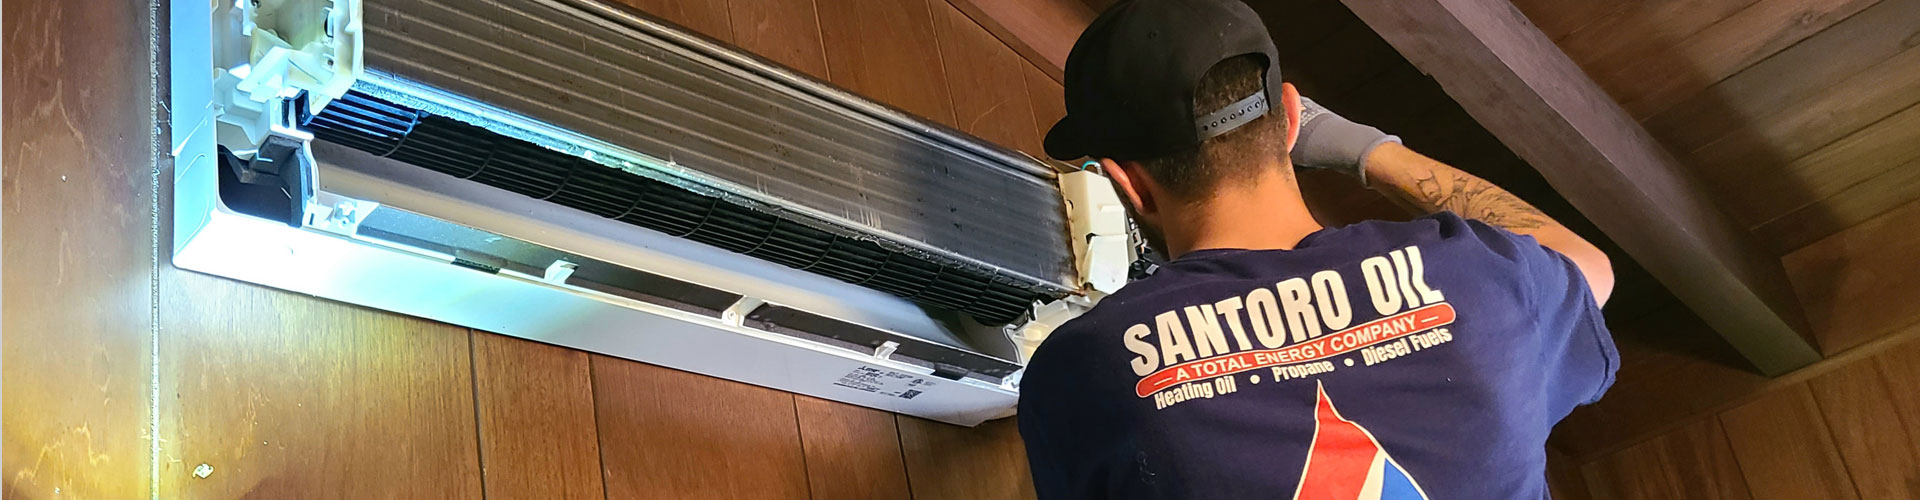 Santoro technician performing maintenance on a ductless AC unit